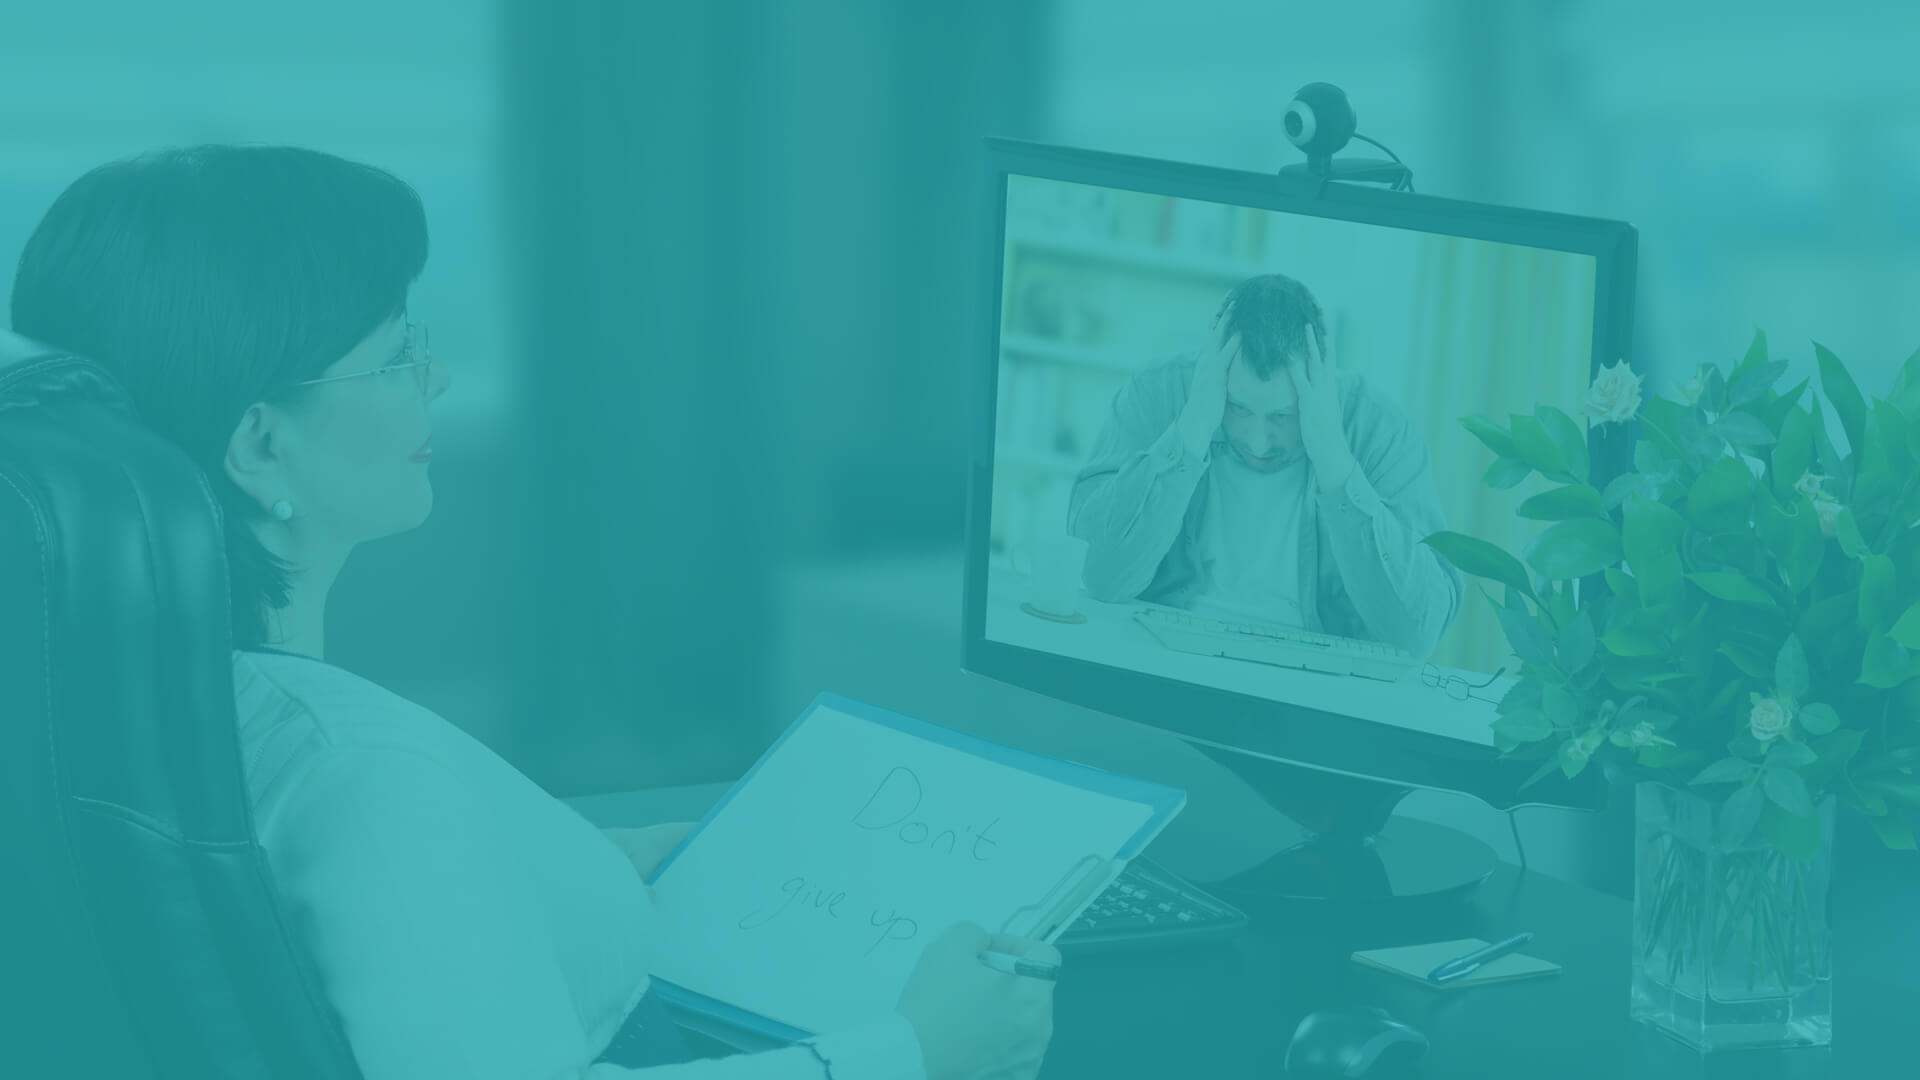 dr. assisting patient remotely with telehealth technology